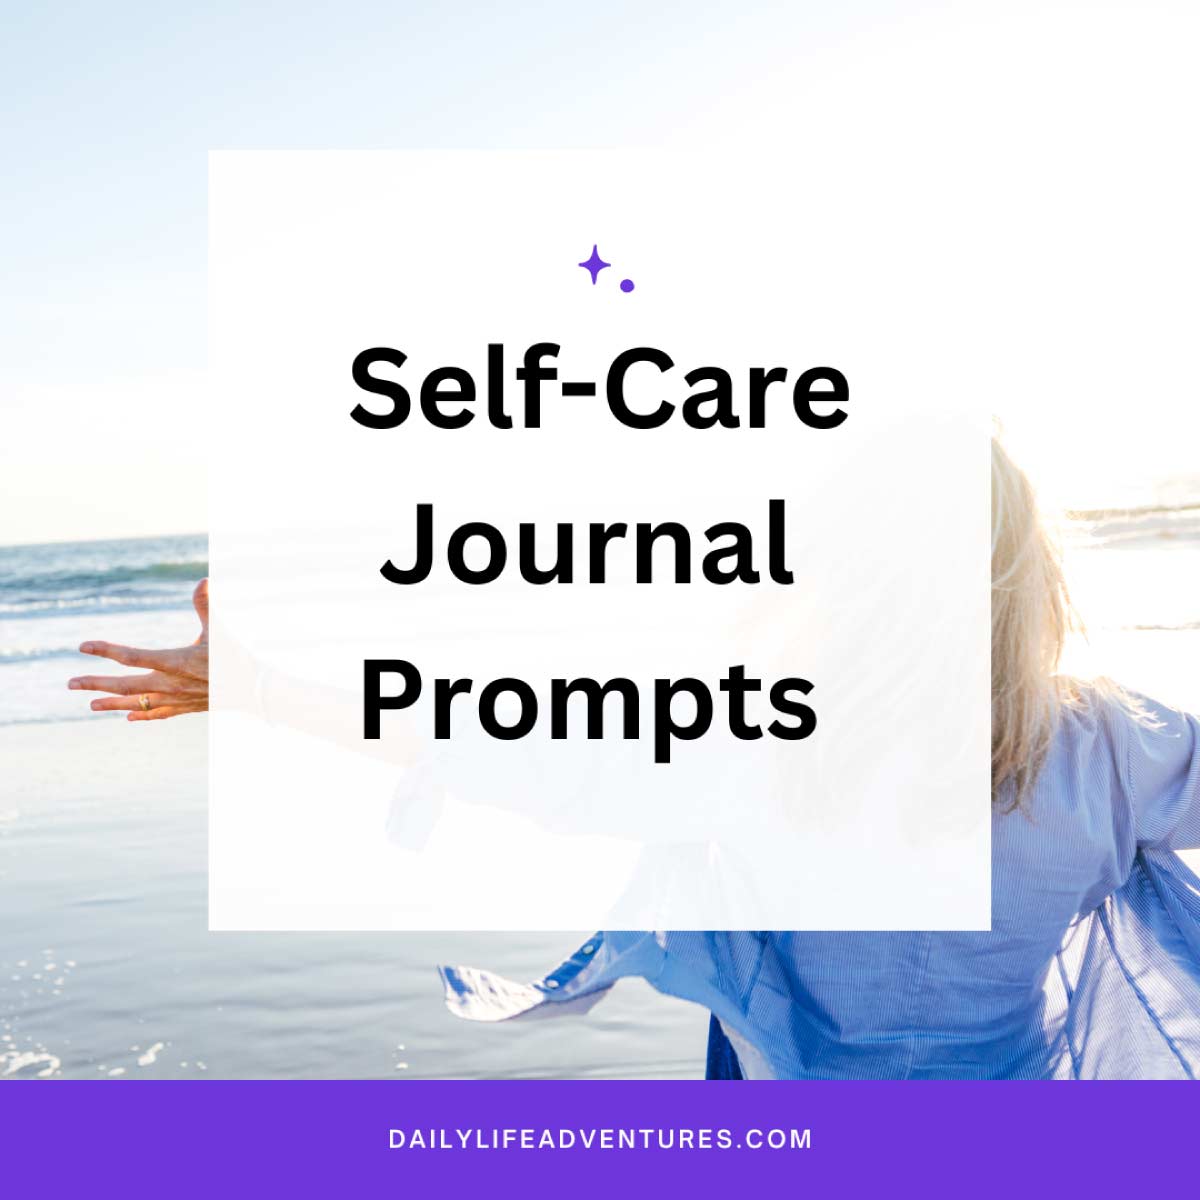 Daily Life Adventures | Self Care, Journaling and more